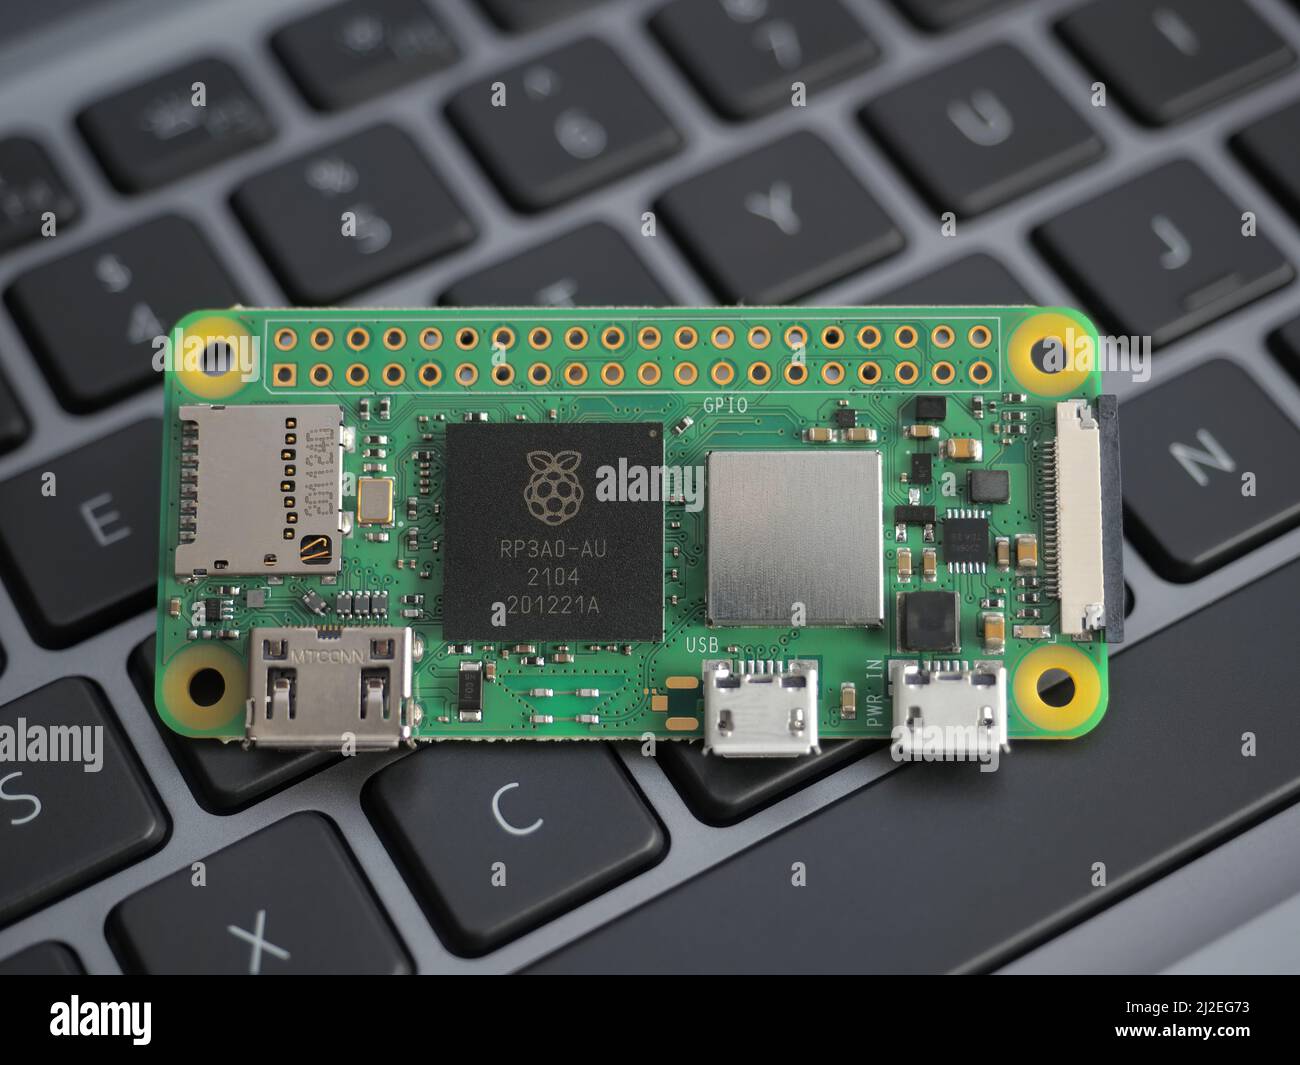 Pi Zero 2 High Resolution Stock Photography and Images - Alamy